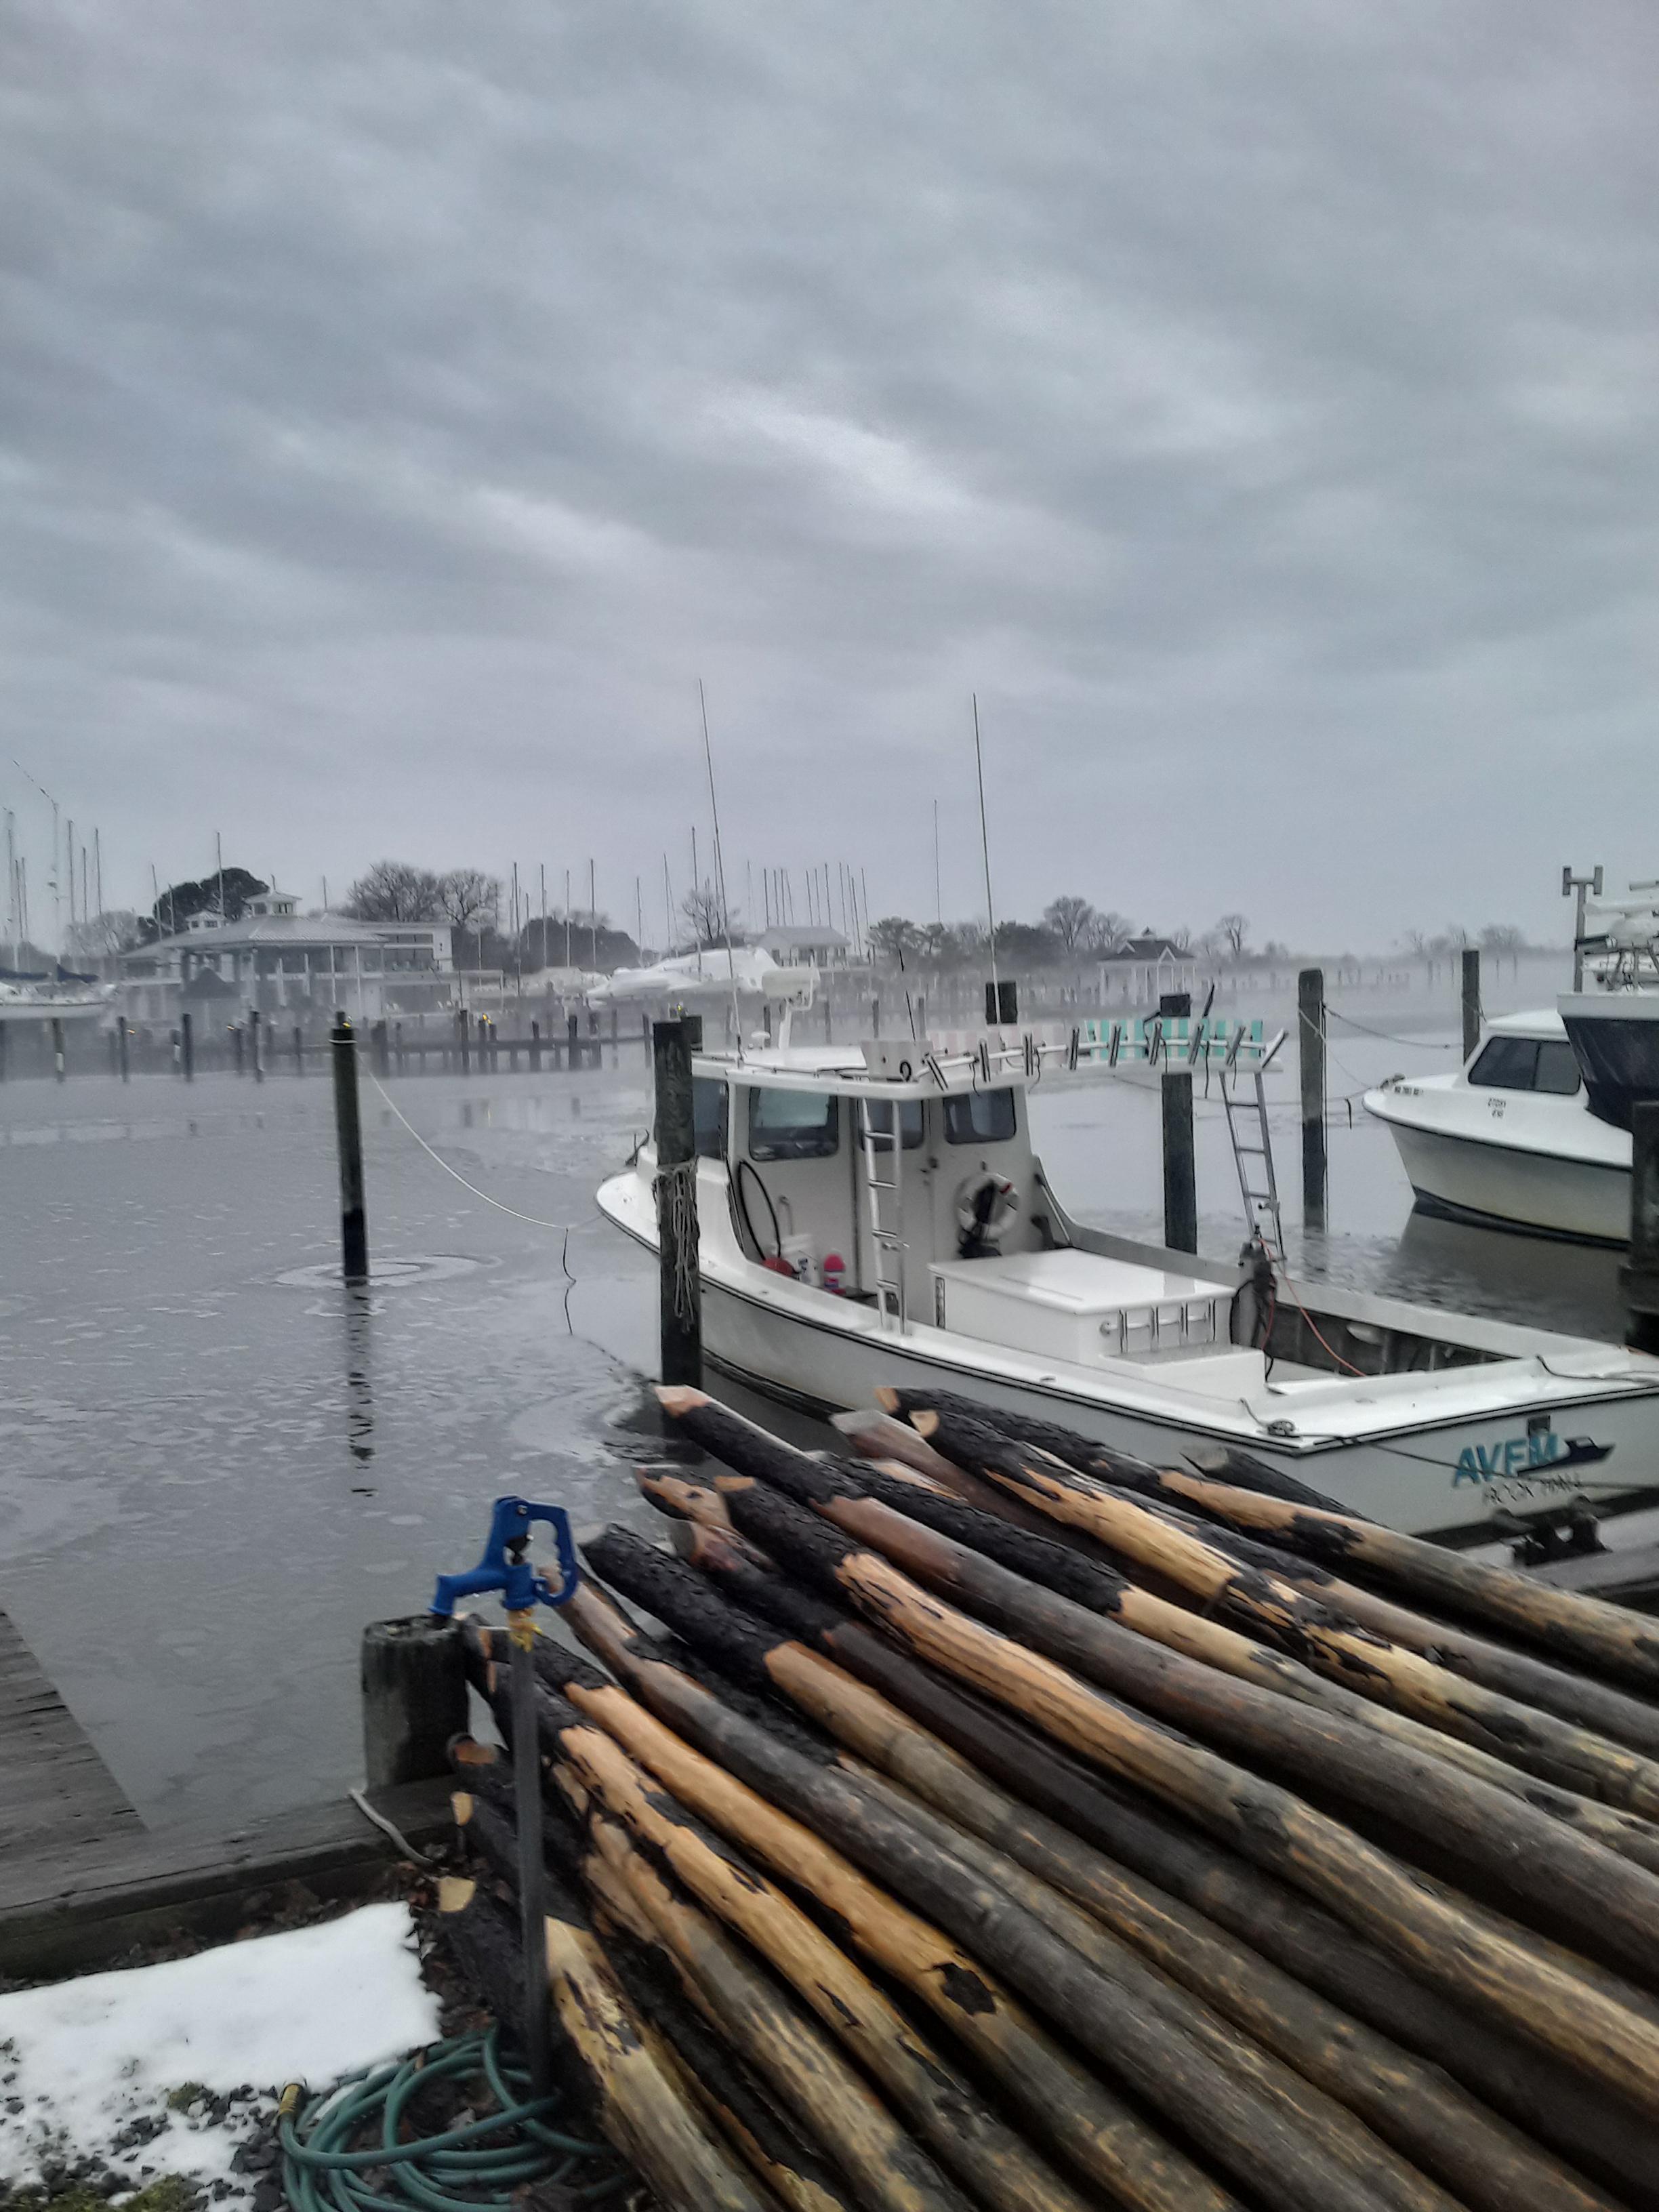 Pine poles for pound nets ready at Rock Hall Harbor